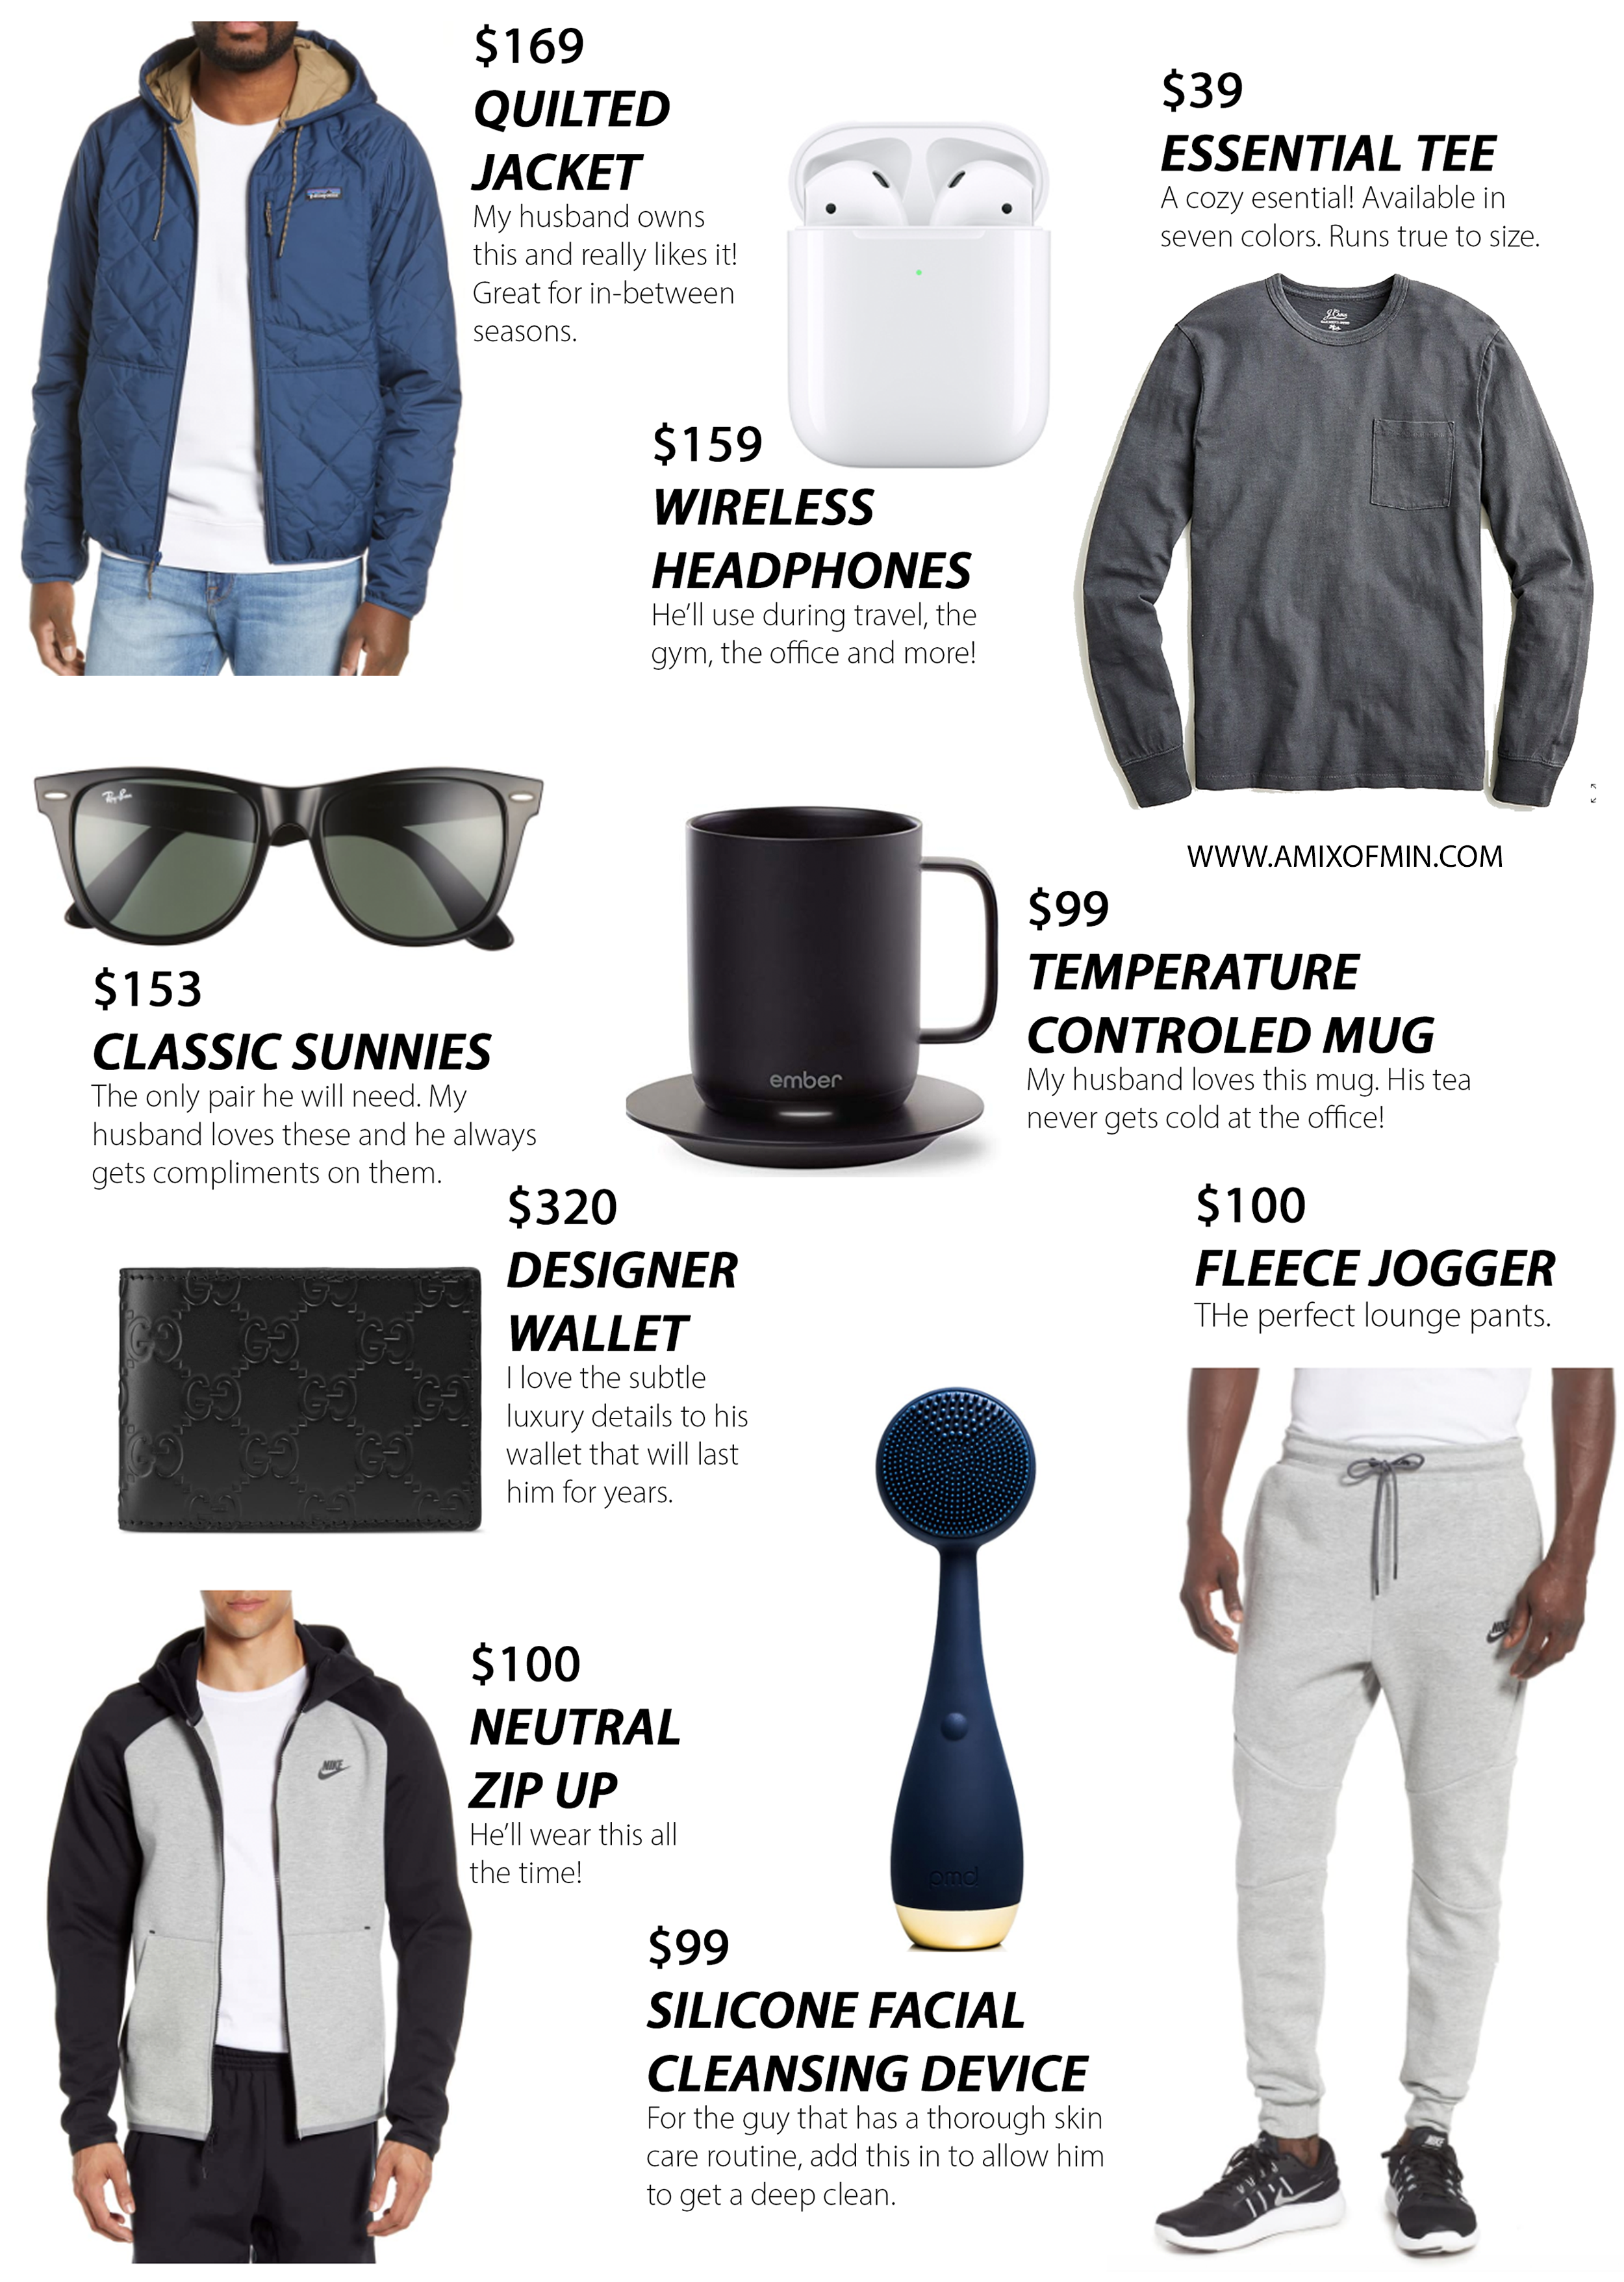 HOLIDAY GIFT GUIDE for him